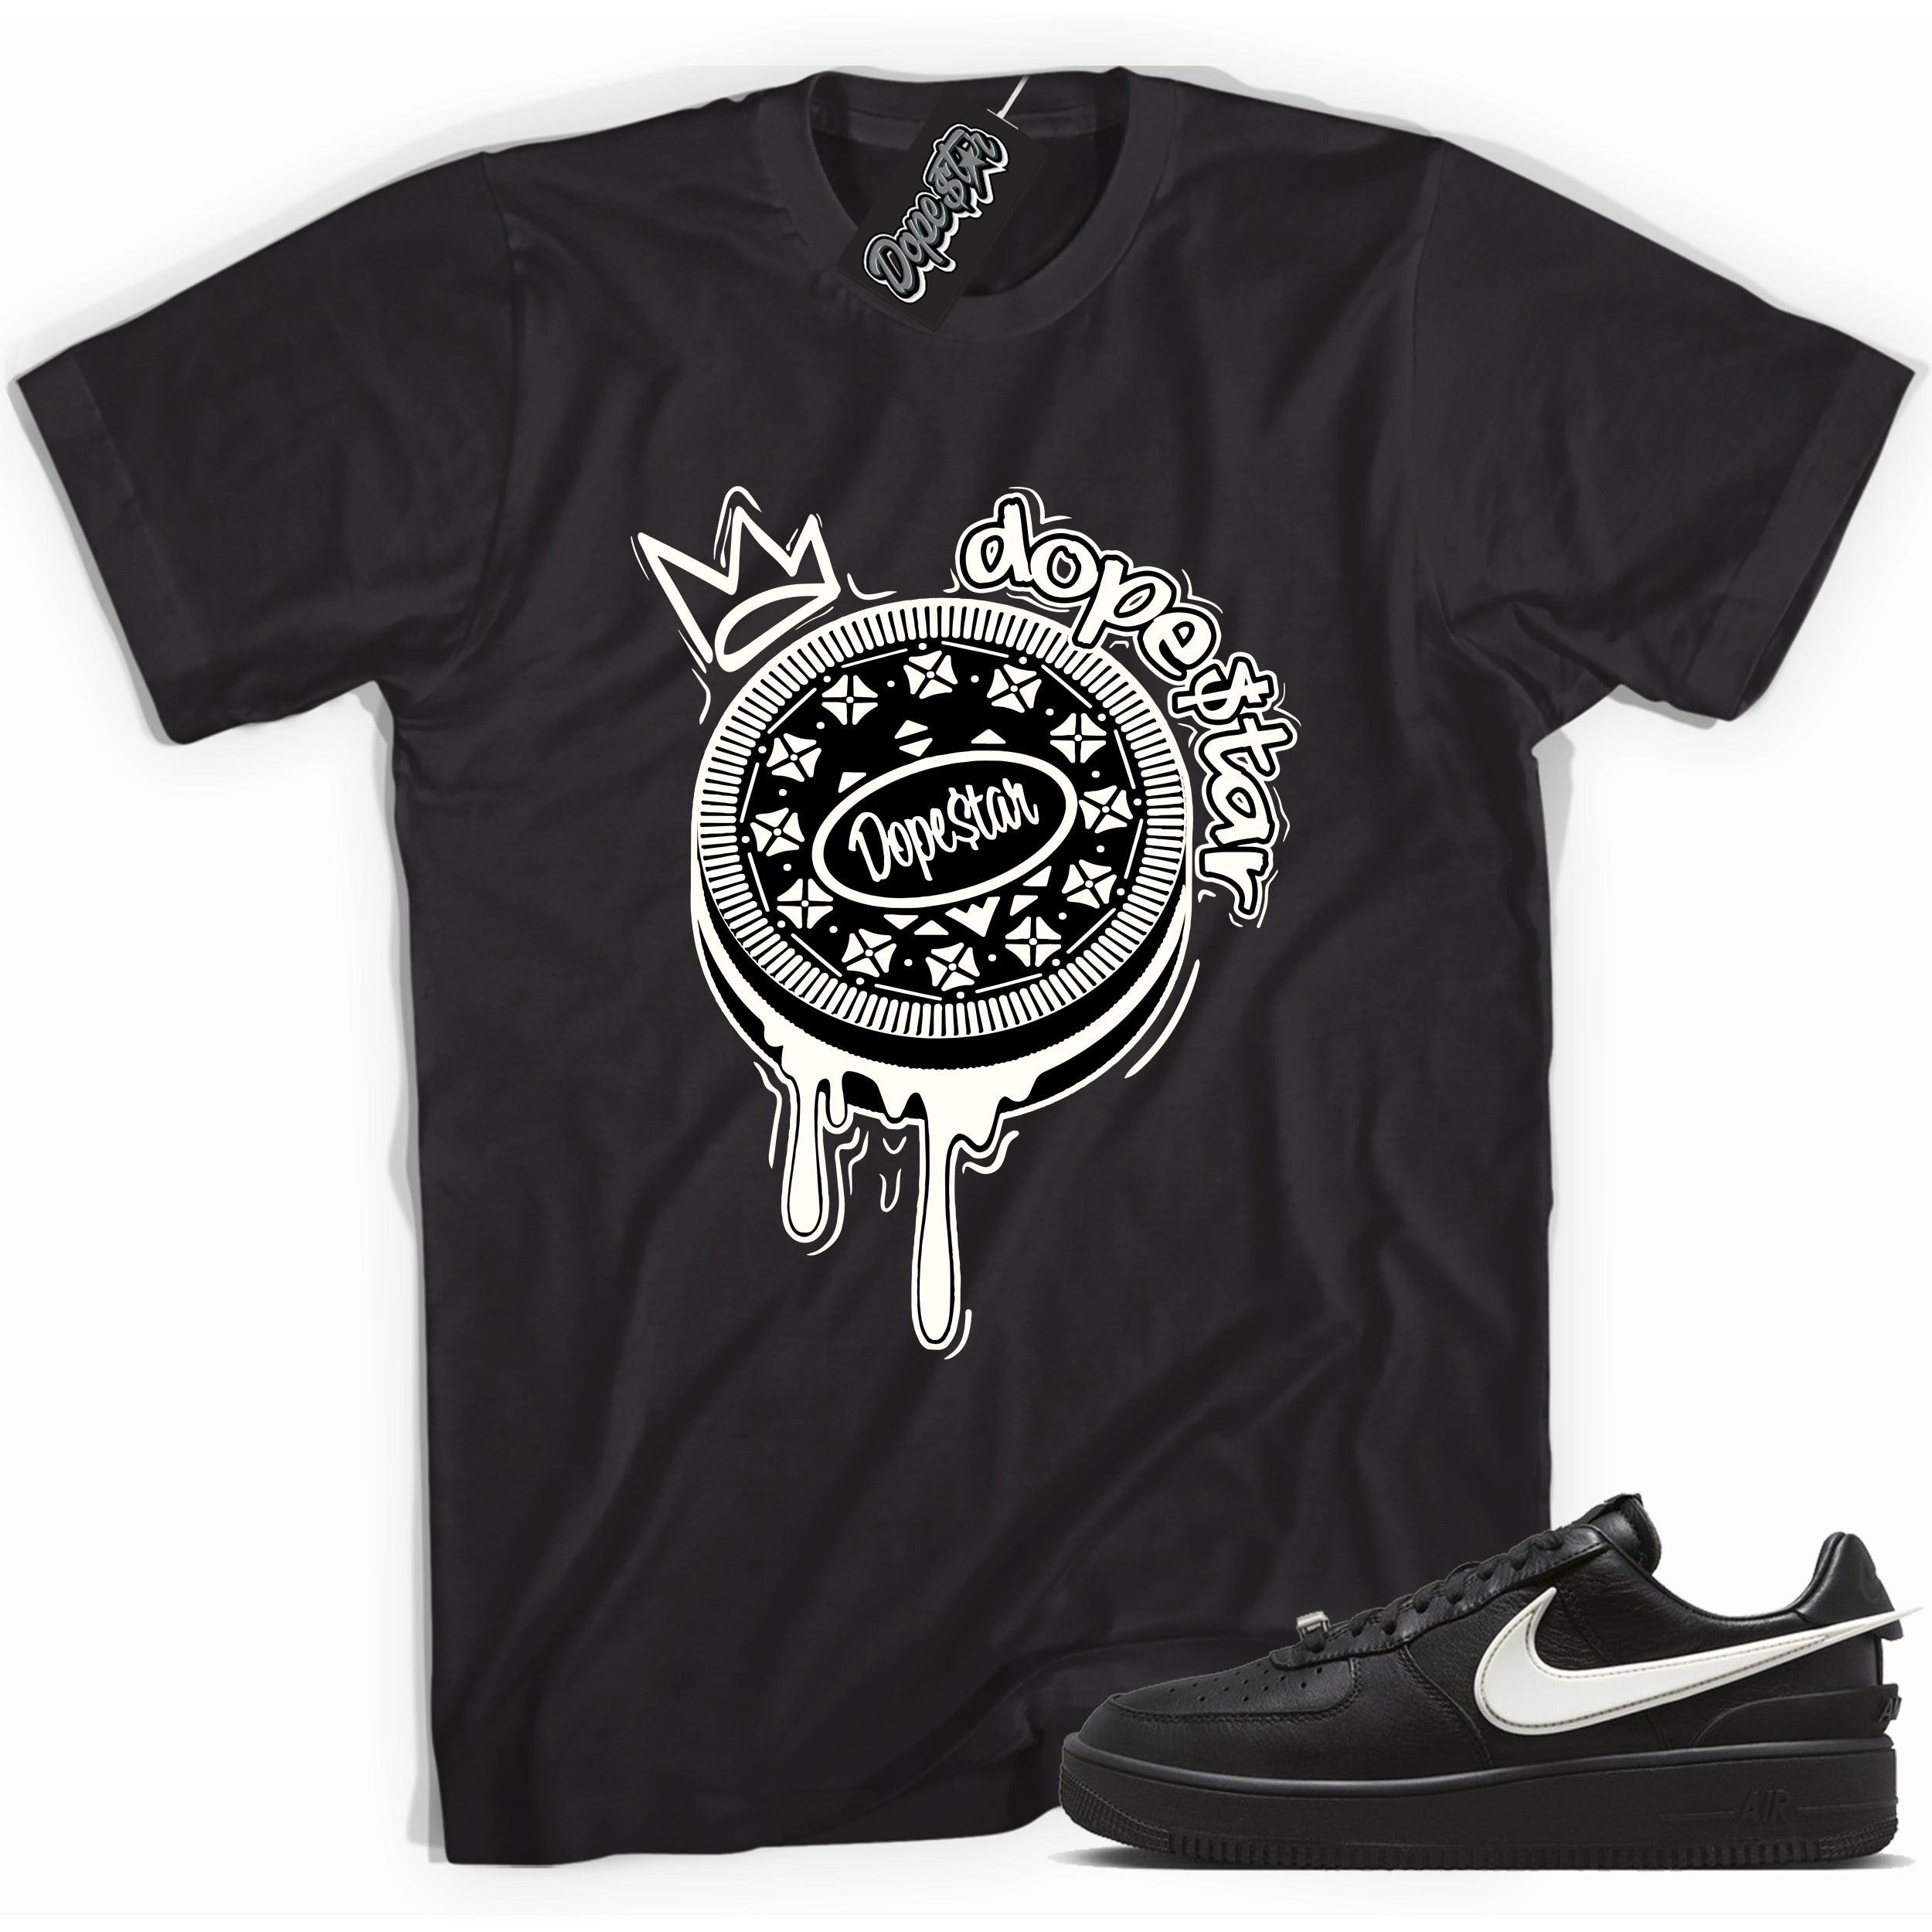 Cool black graphic tee with 'Oreo Dope$tar' print, that perfectly matches Nike Air Force 1 Low SP Ambush Phantom sneakers.